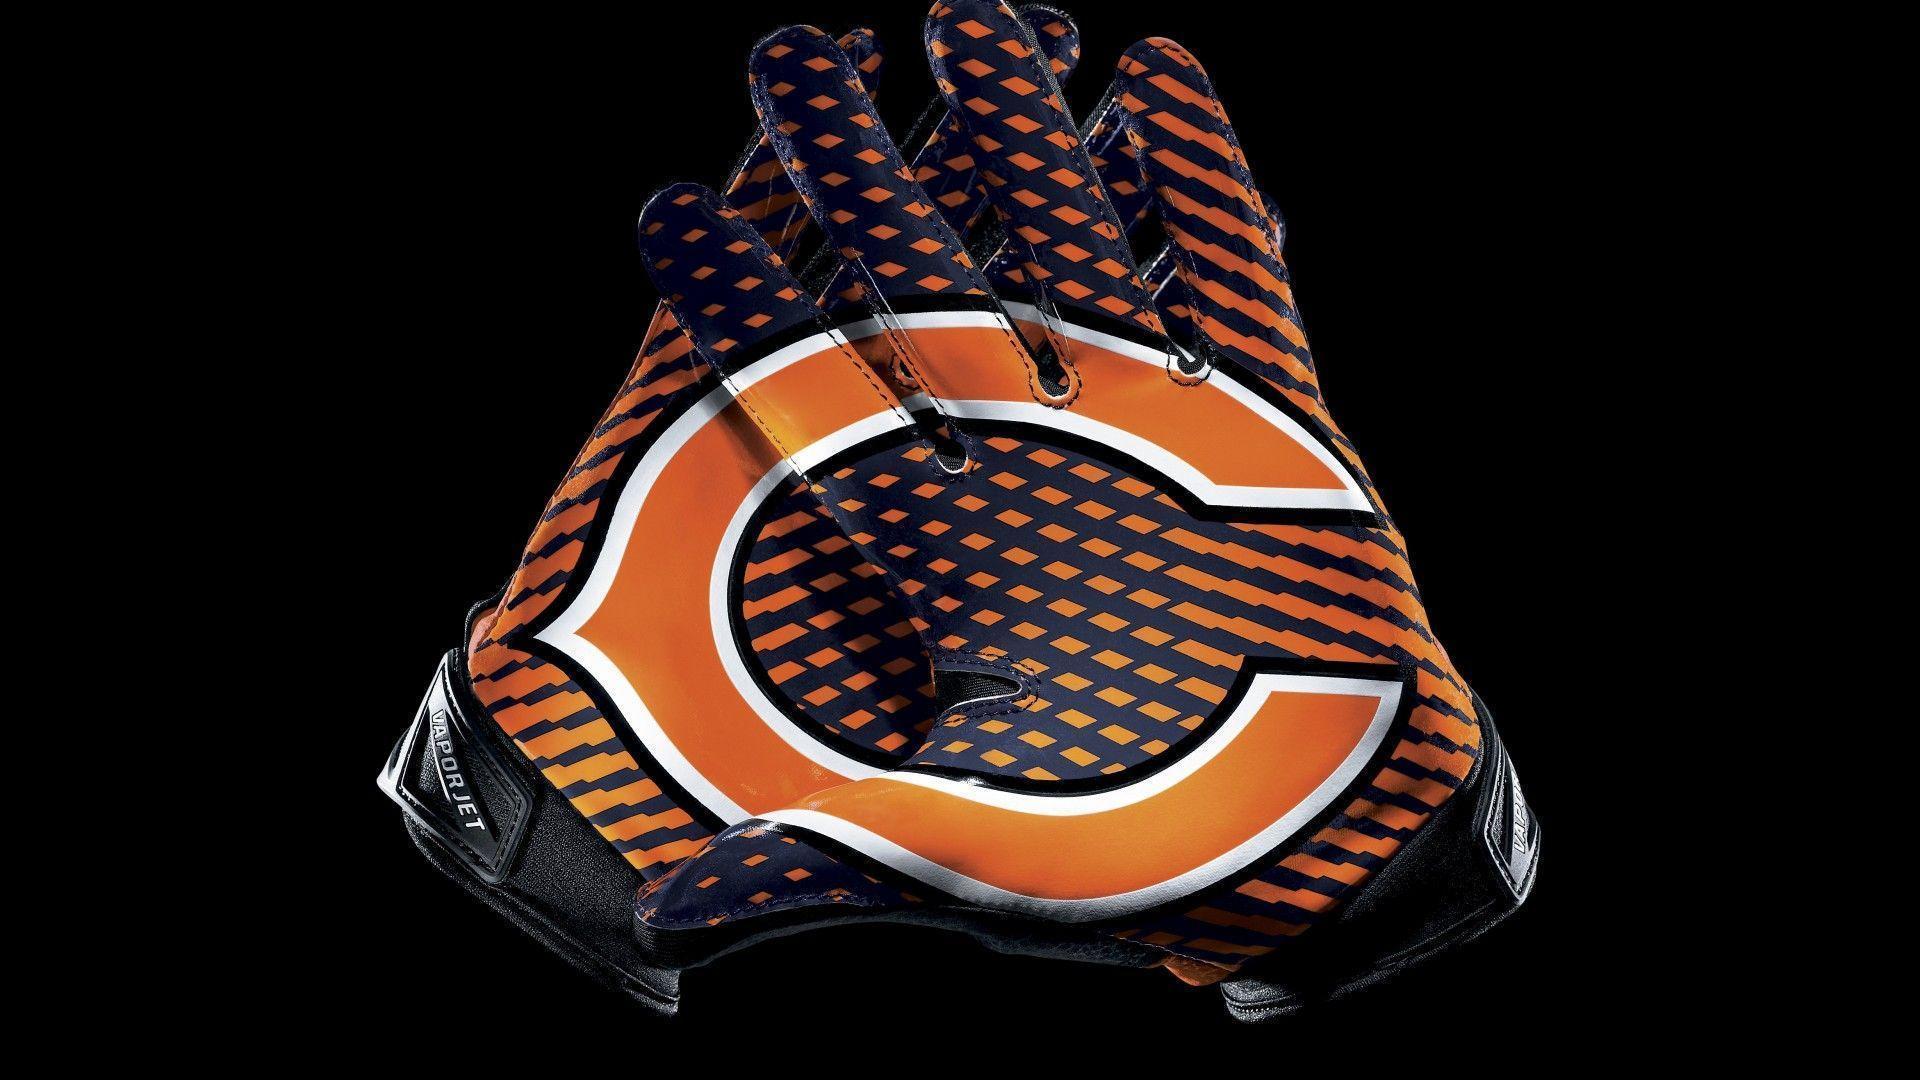 Chicago Bears Backgrounds